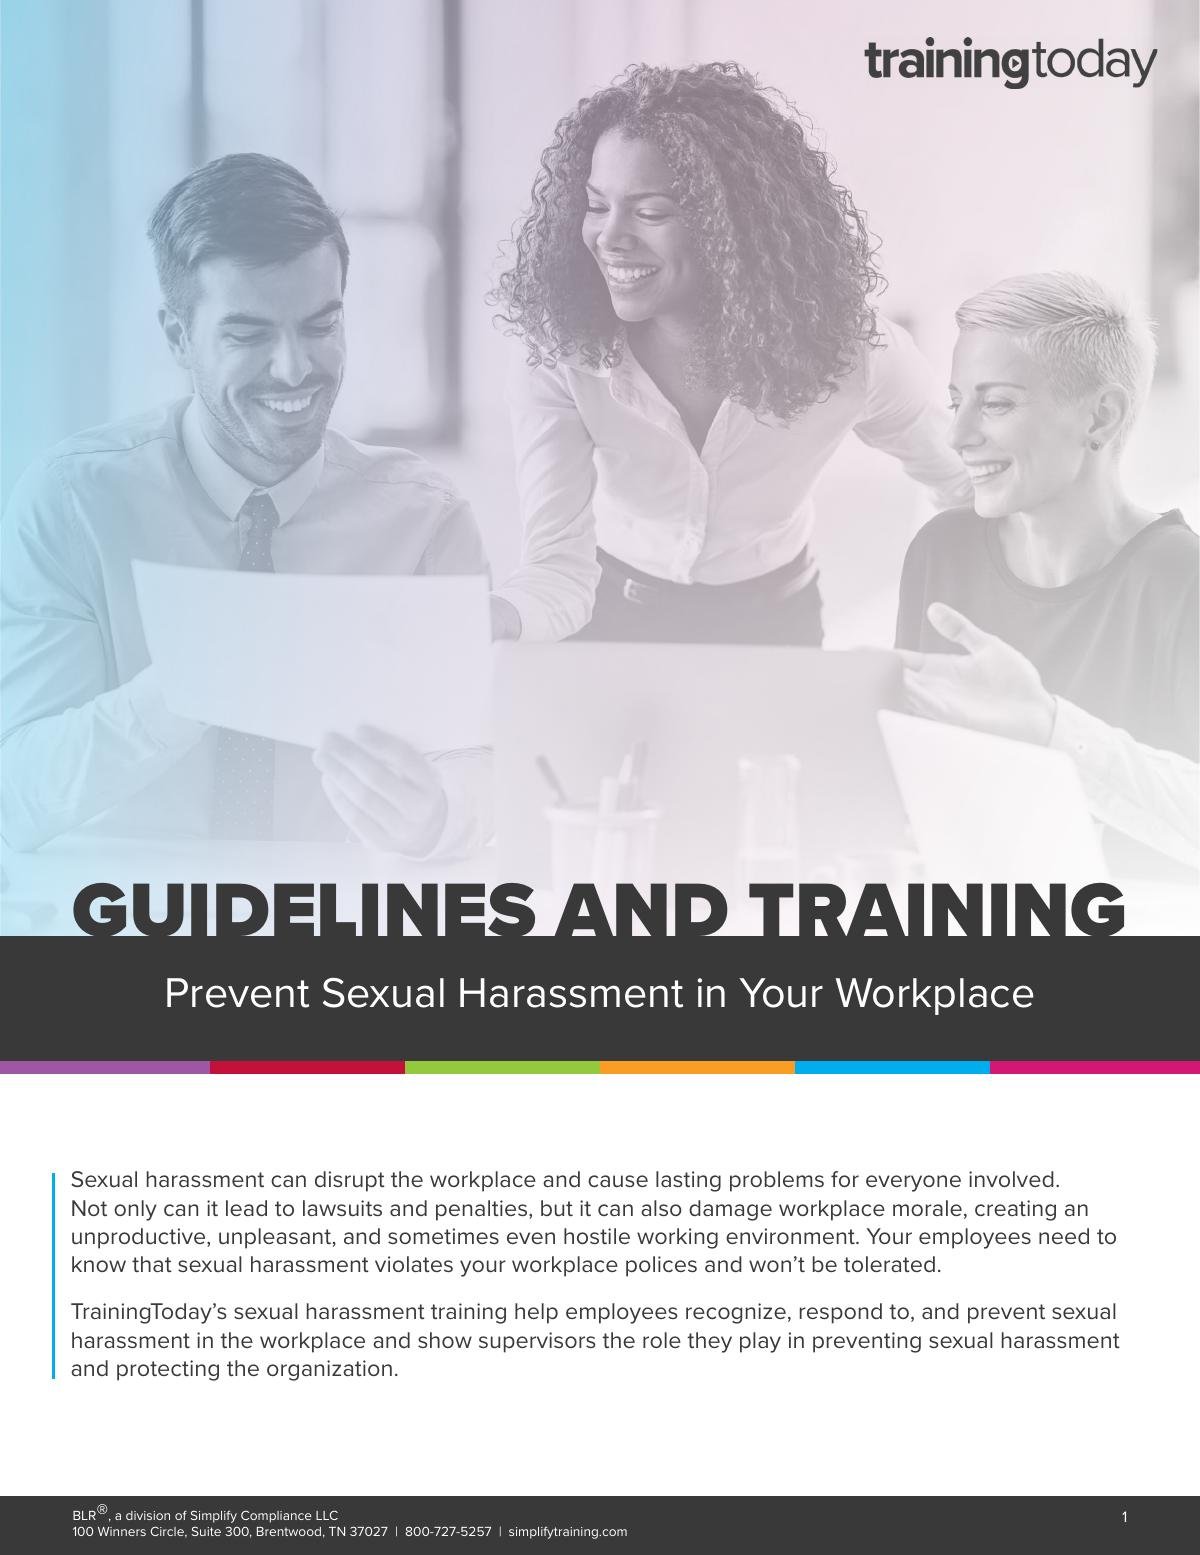 Sexual Harassment Guidelines and Training